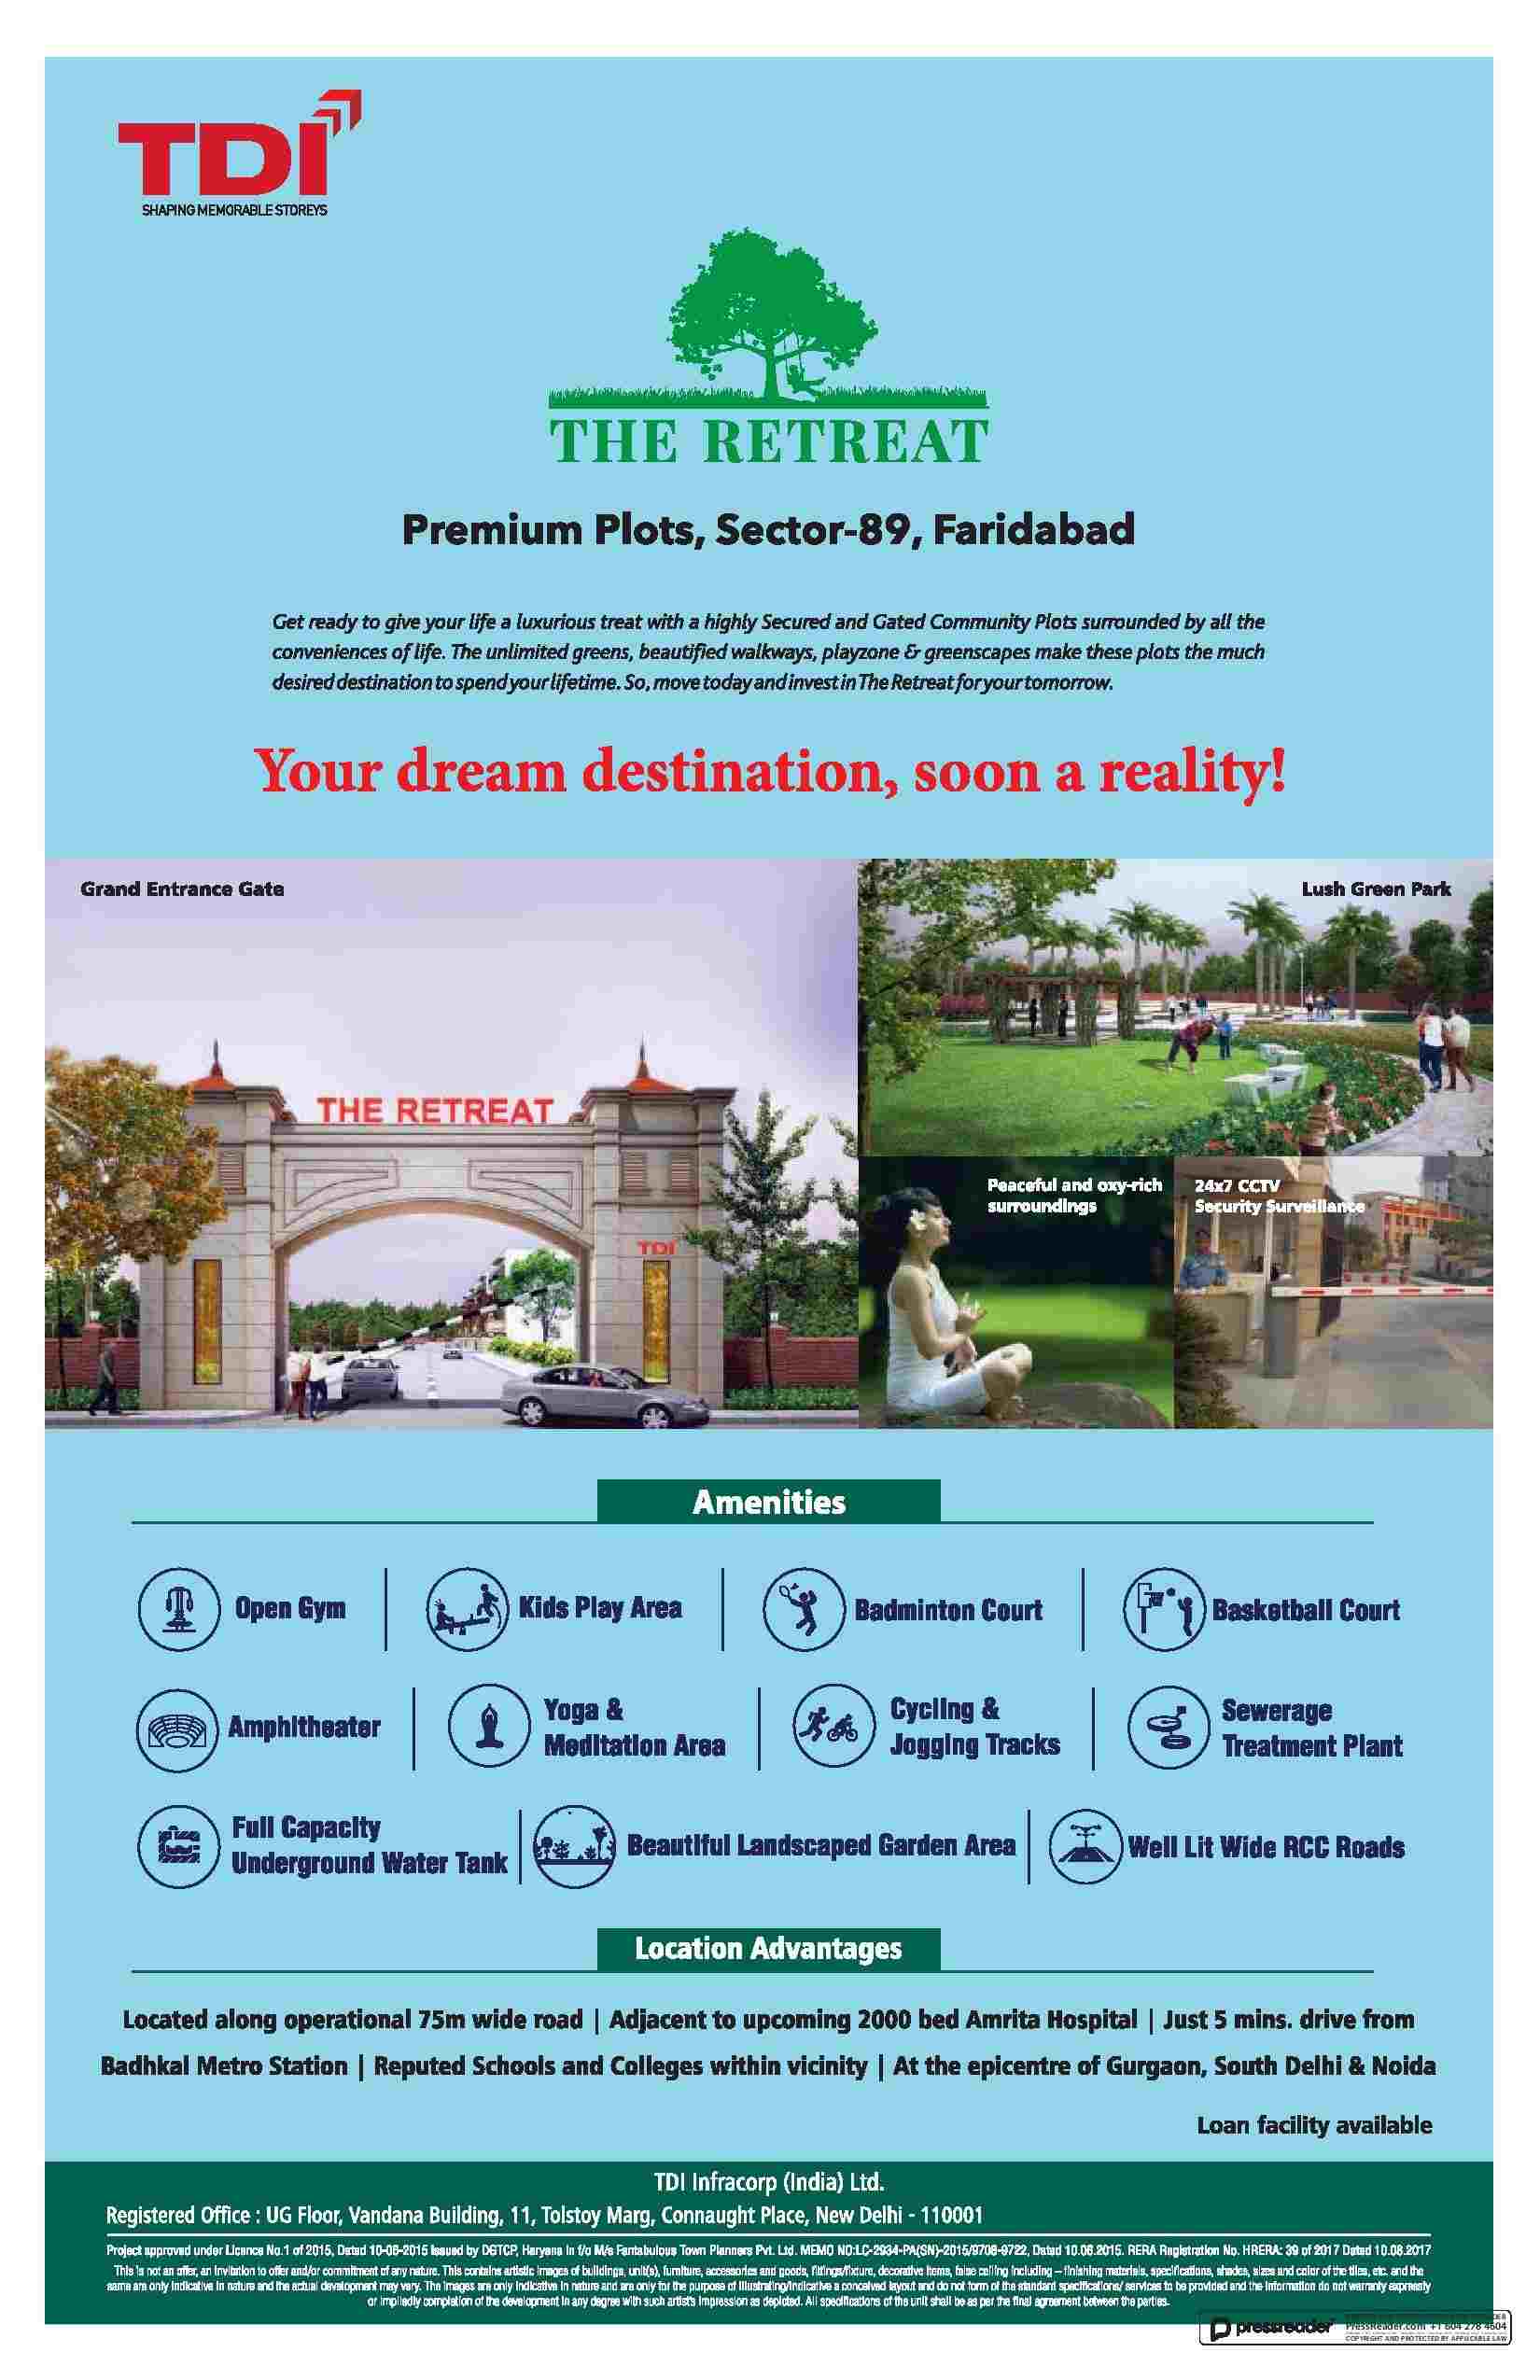 Your dream destination soon a reality at TDI The Retreat in Faridabad Update